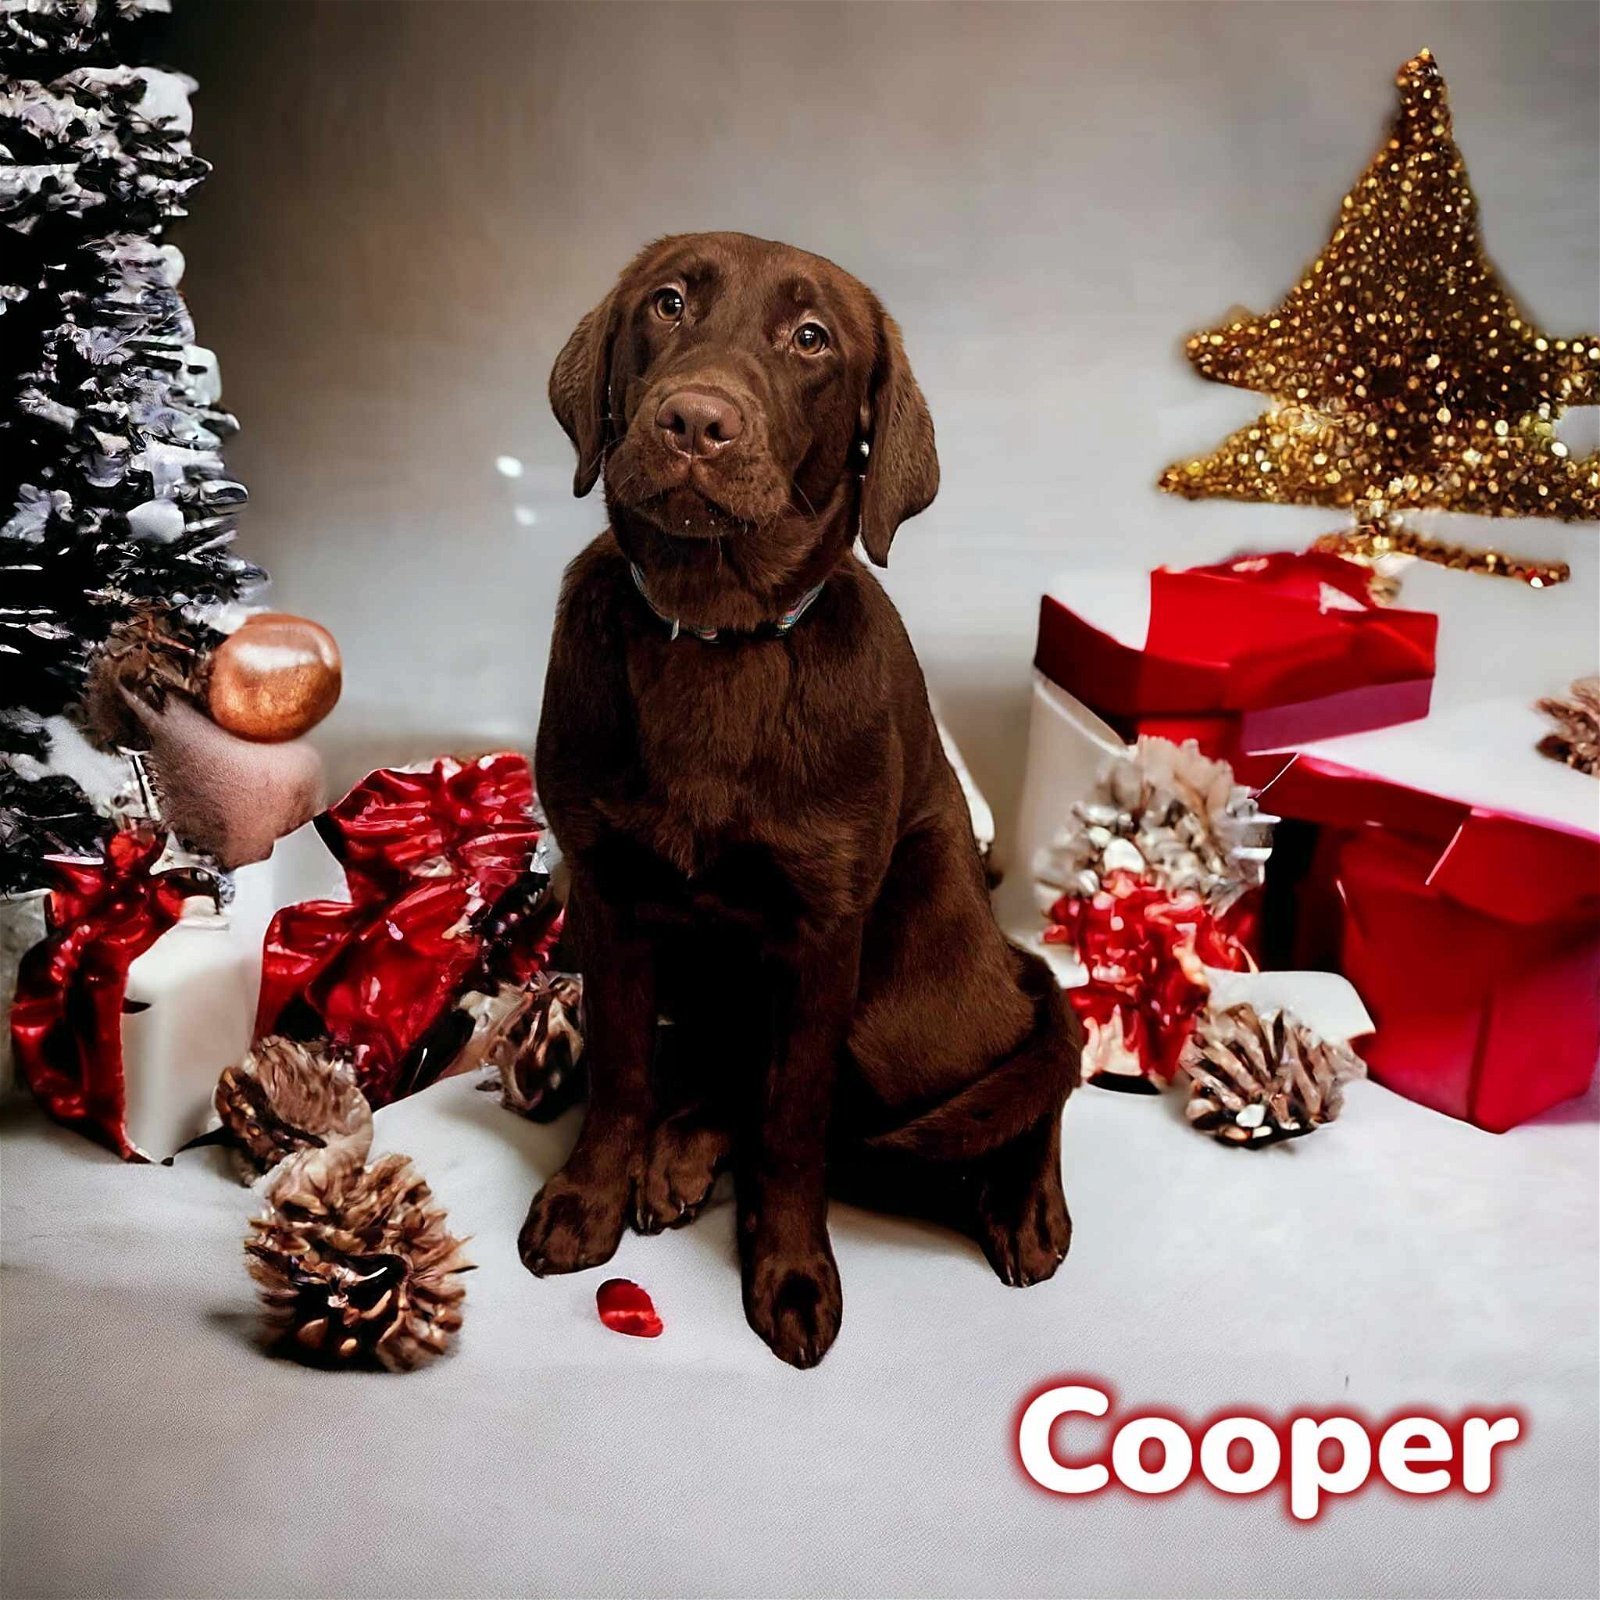 Cooper detail page